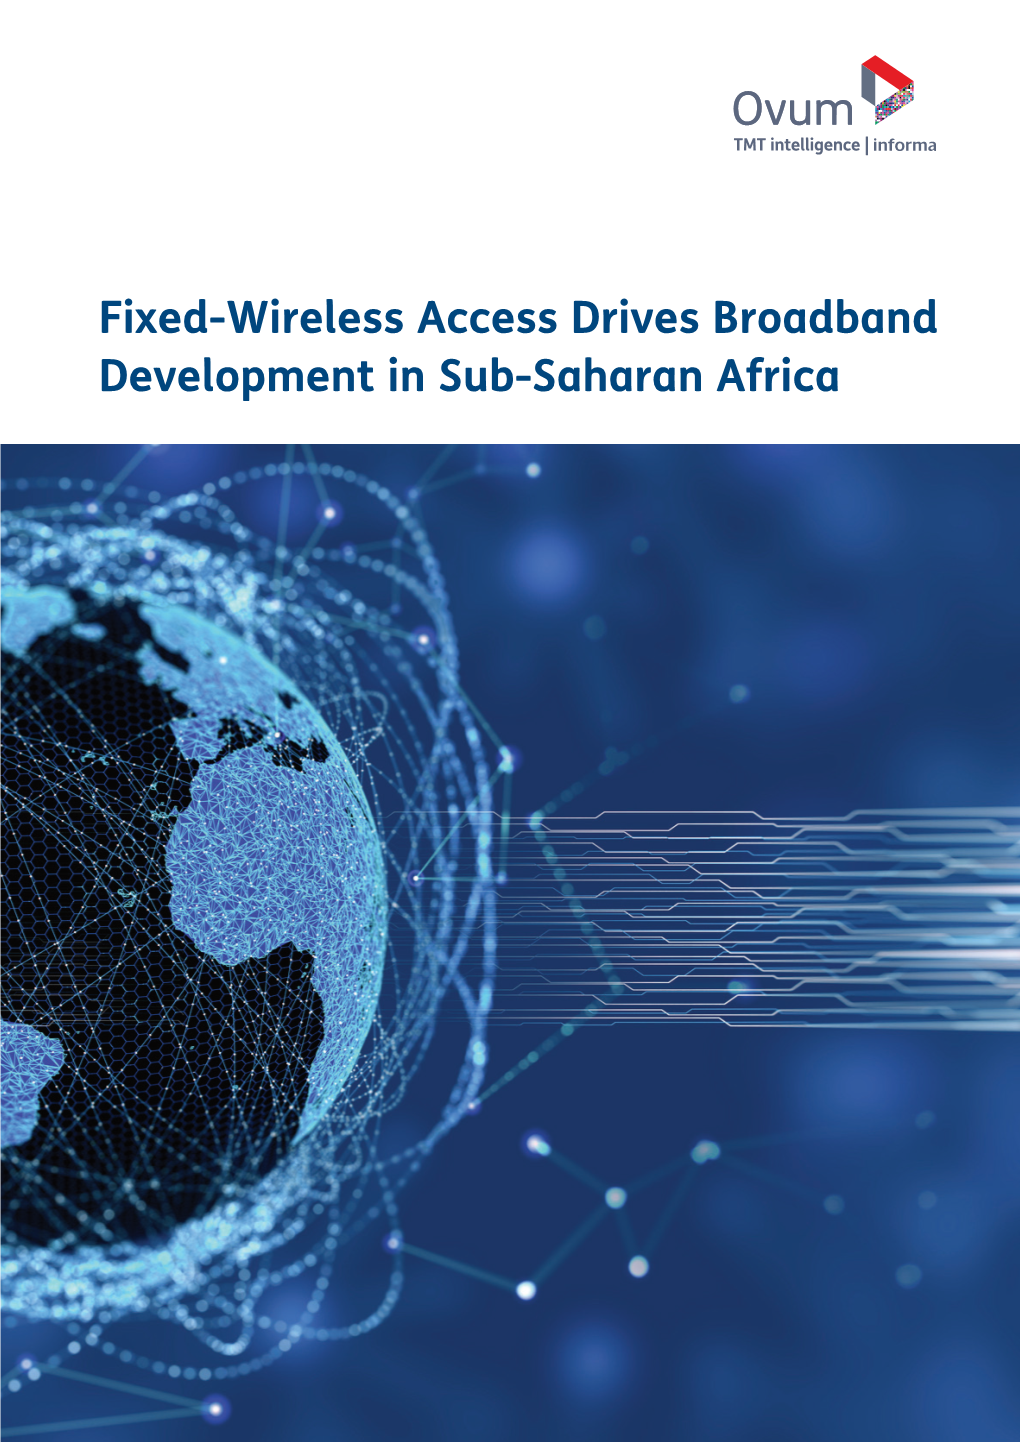 Fixed-Wireless Access Drives Broadband Development in Sub-Saharan Africa Contents About the Author Executive Summary